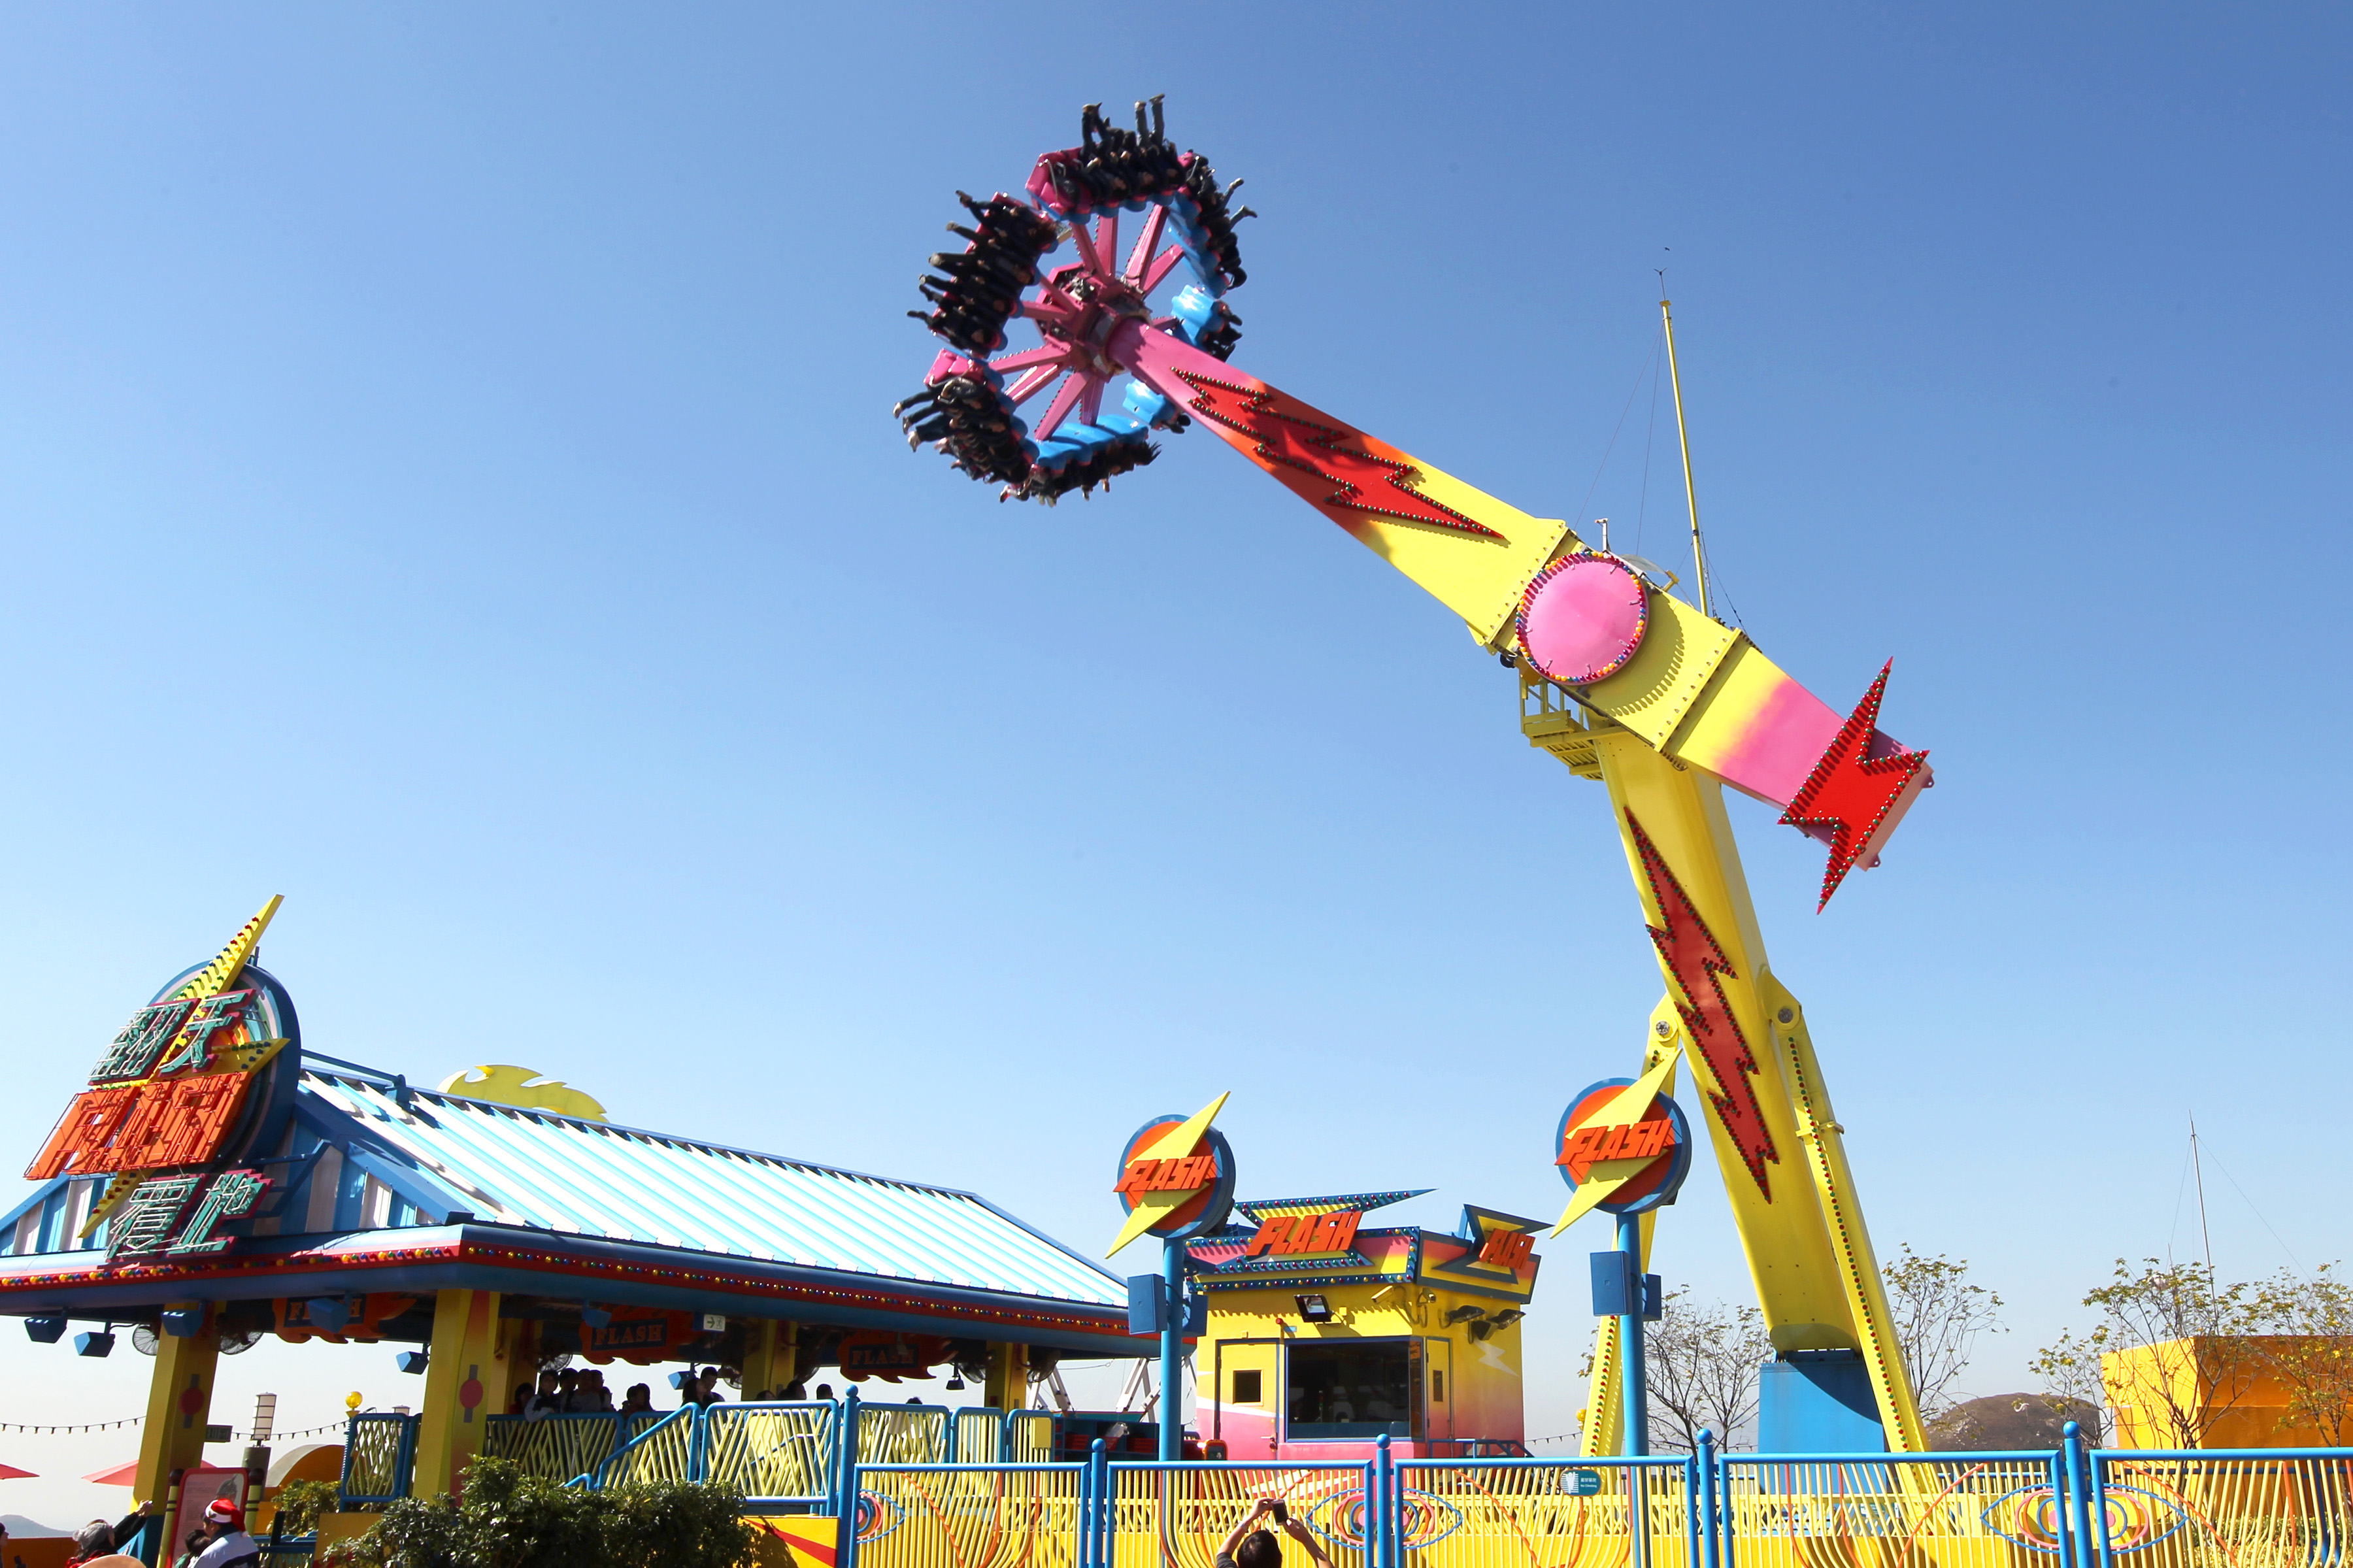 File:Thrill Mountain - The Flash.jpg - Wikimedia Commons